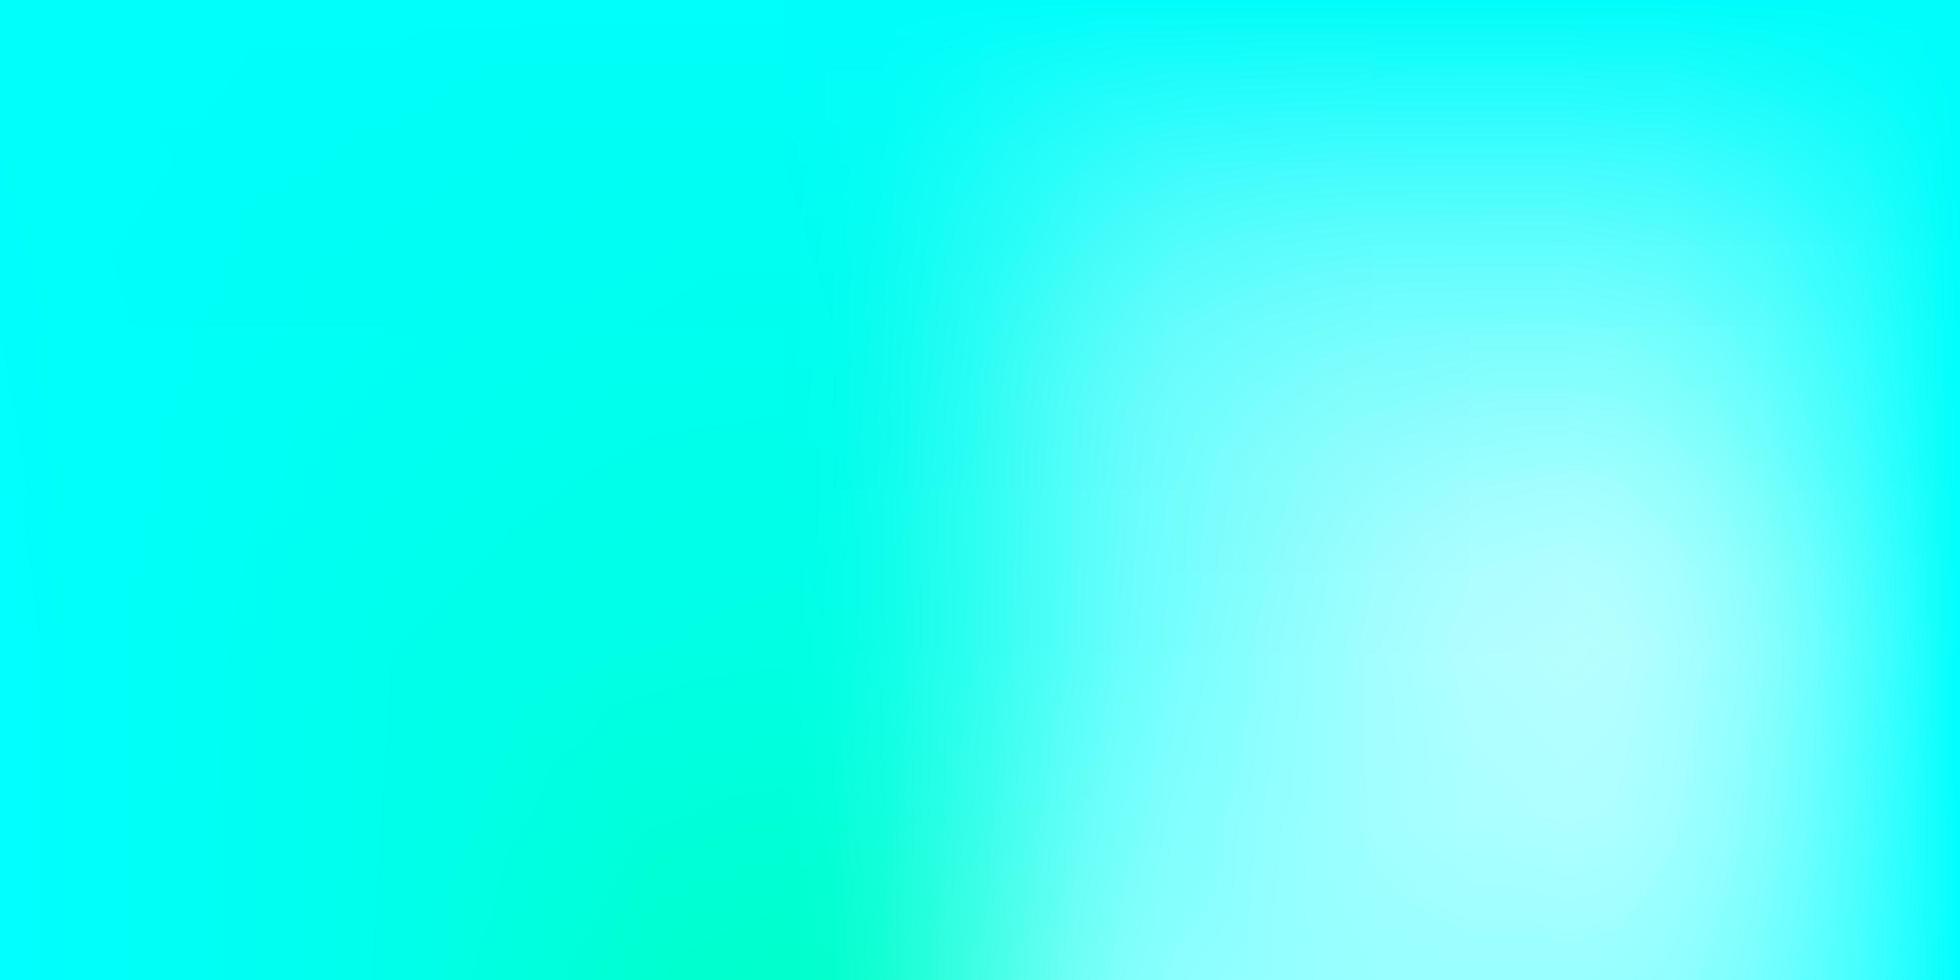 Light Green vector blurred layout.